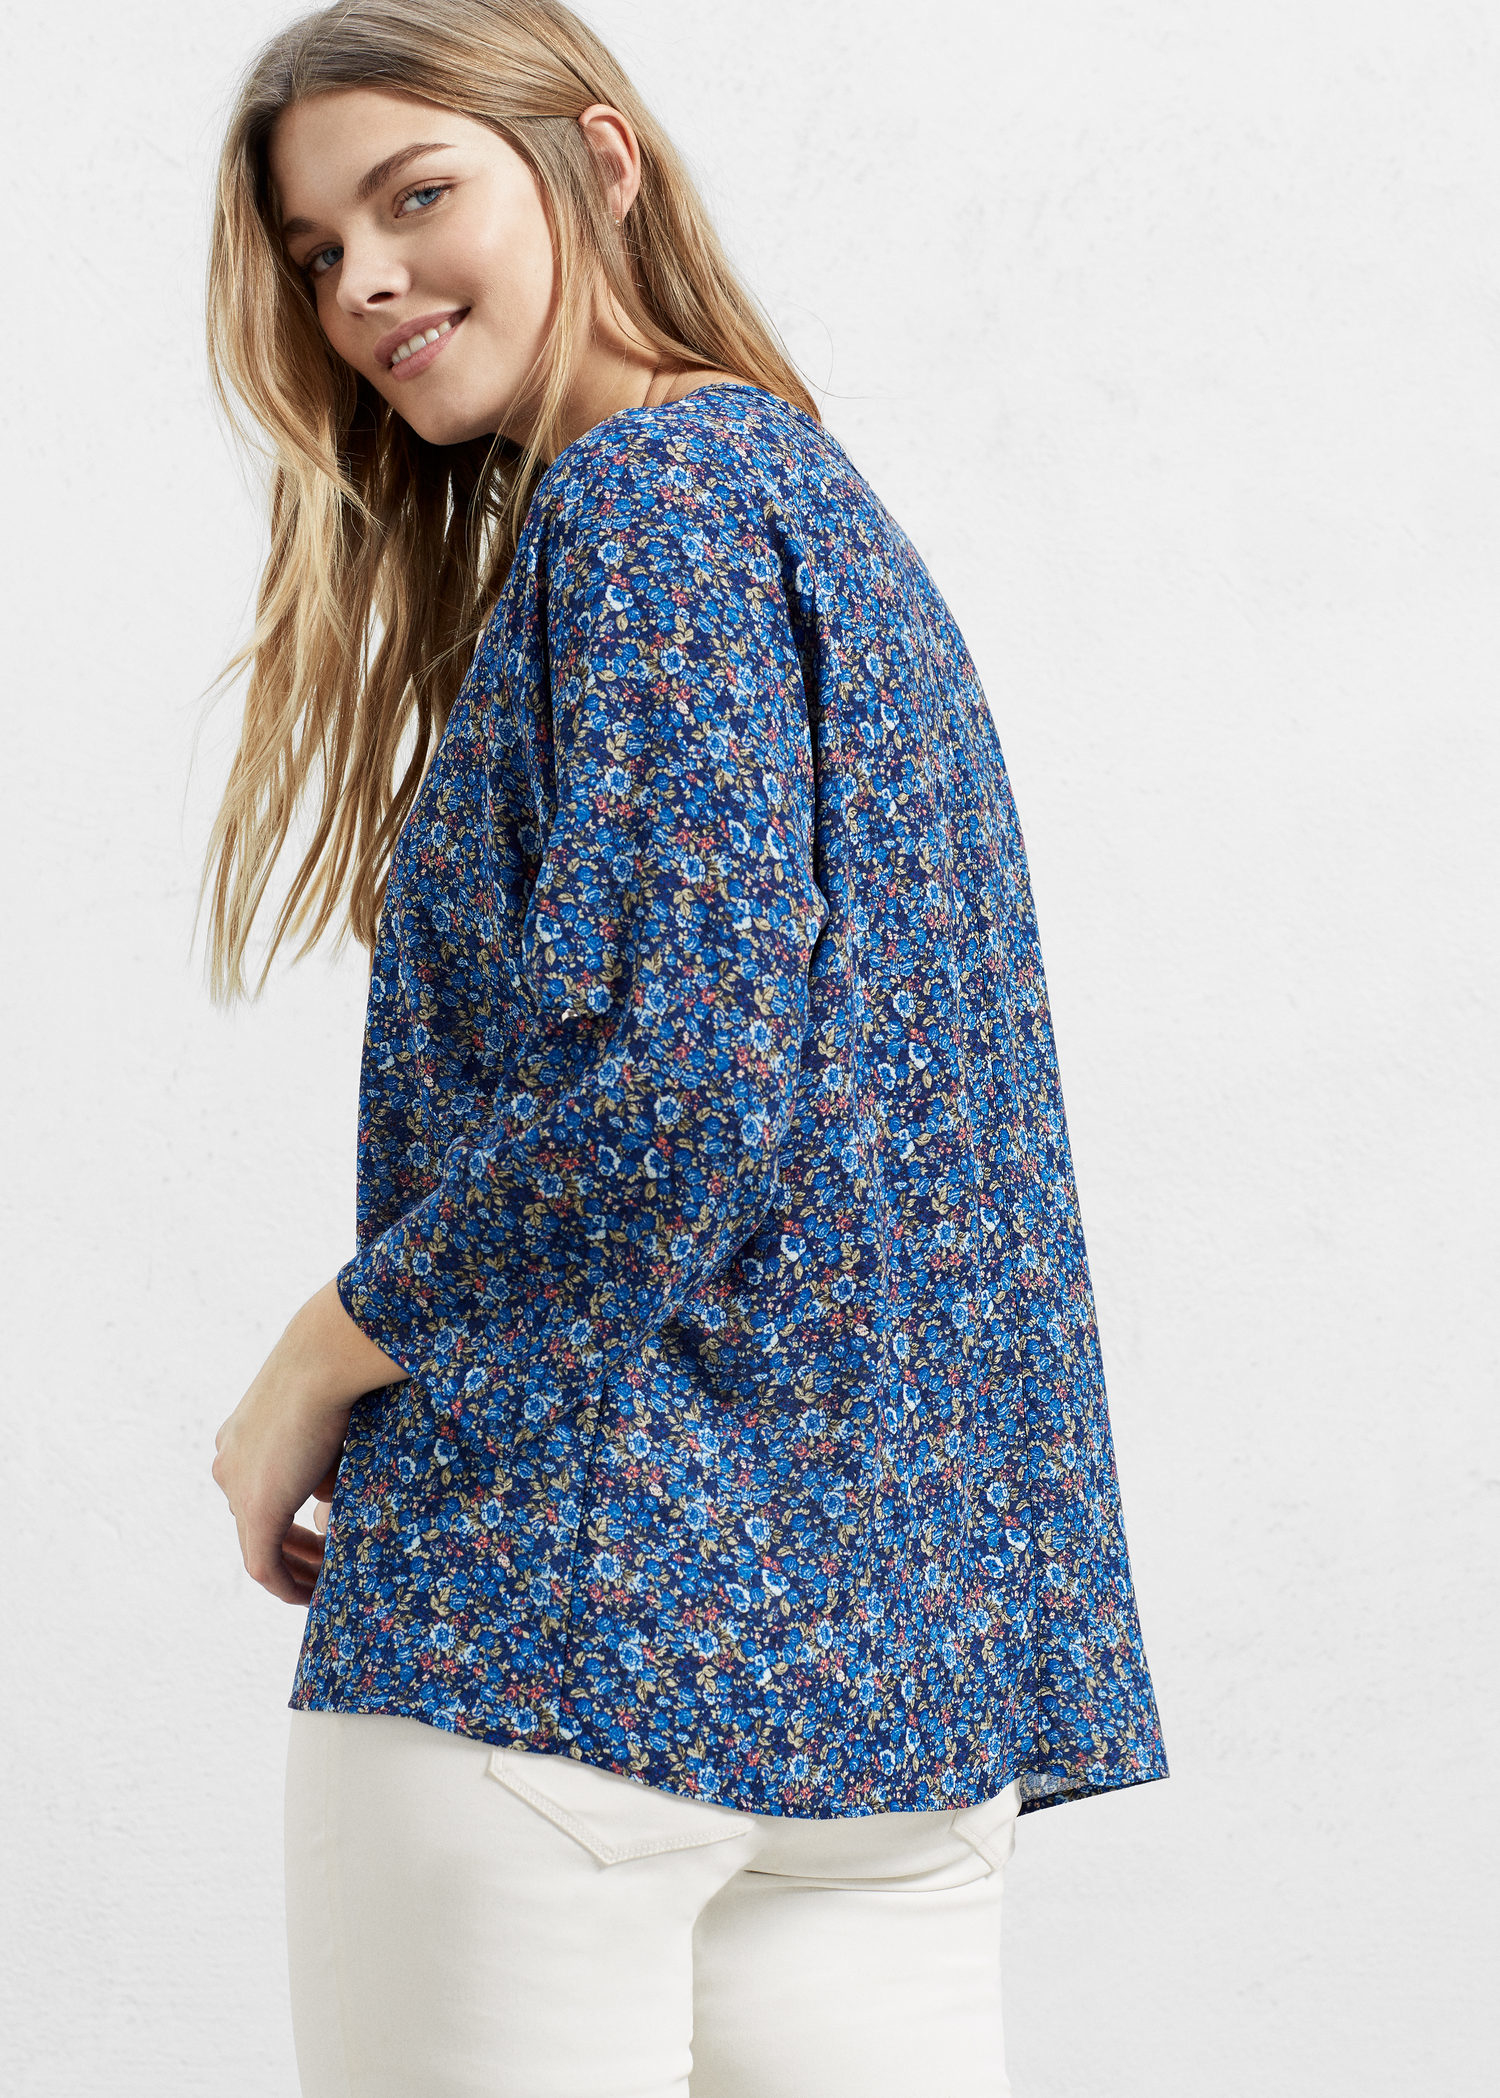 Lyst - Violeta By Mango Floral Print Blouse in Blue